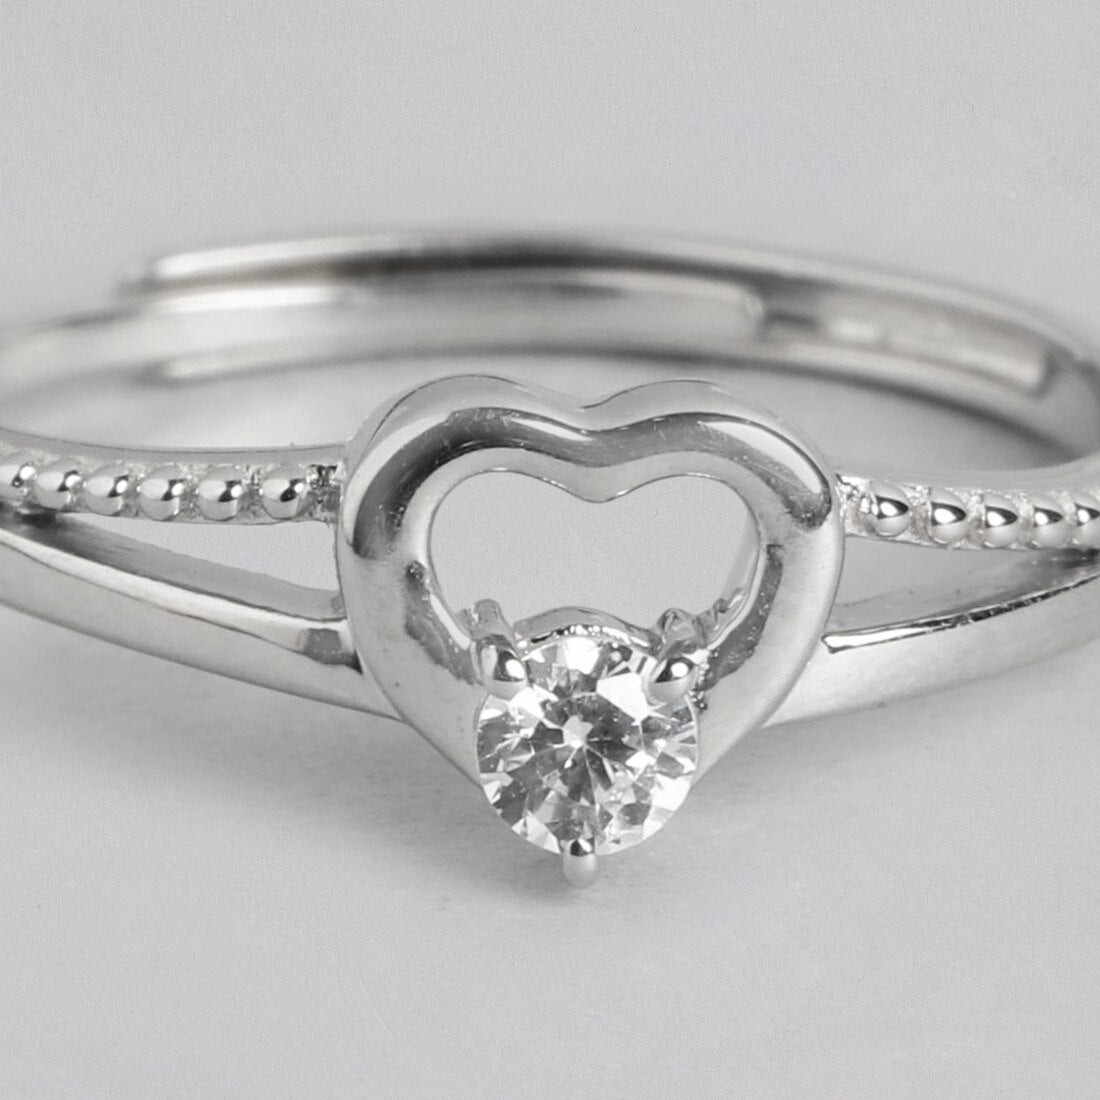 Eternal Love 925 Sterling Silver Rhodium Plated Heart Ring (Adjustable)